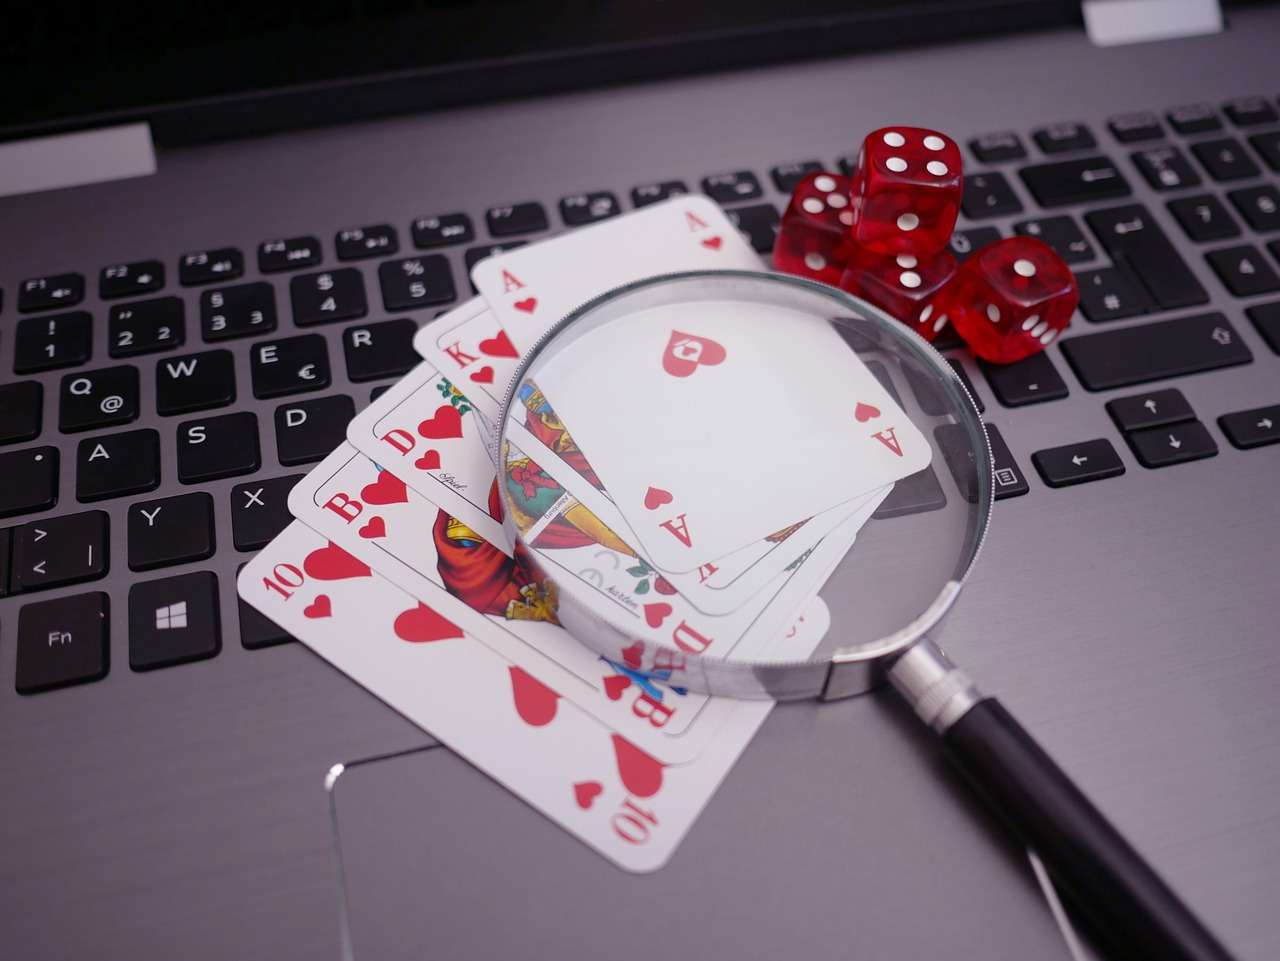 How to Find and Claim the Best Online Casino Promotions and Offers in the UK cards and dice on laptop keyboard with a magnifying glass